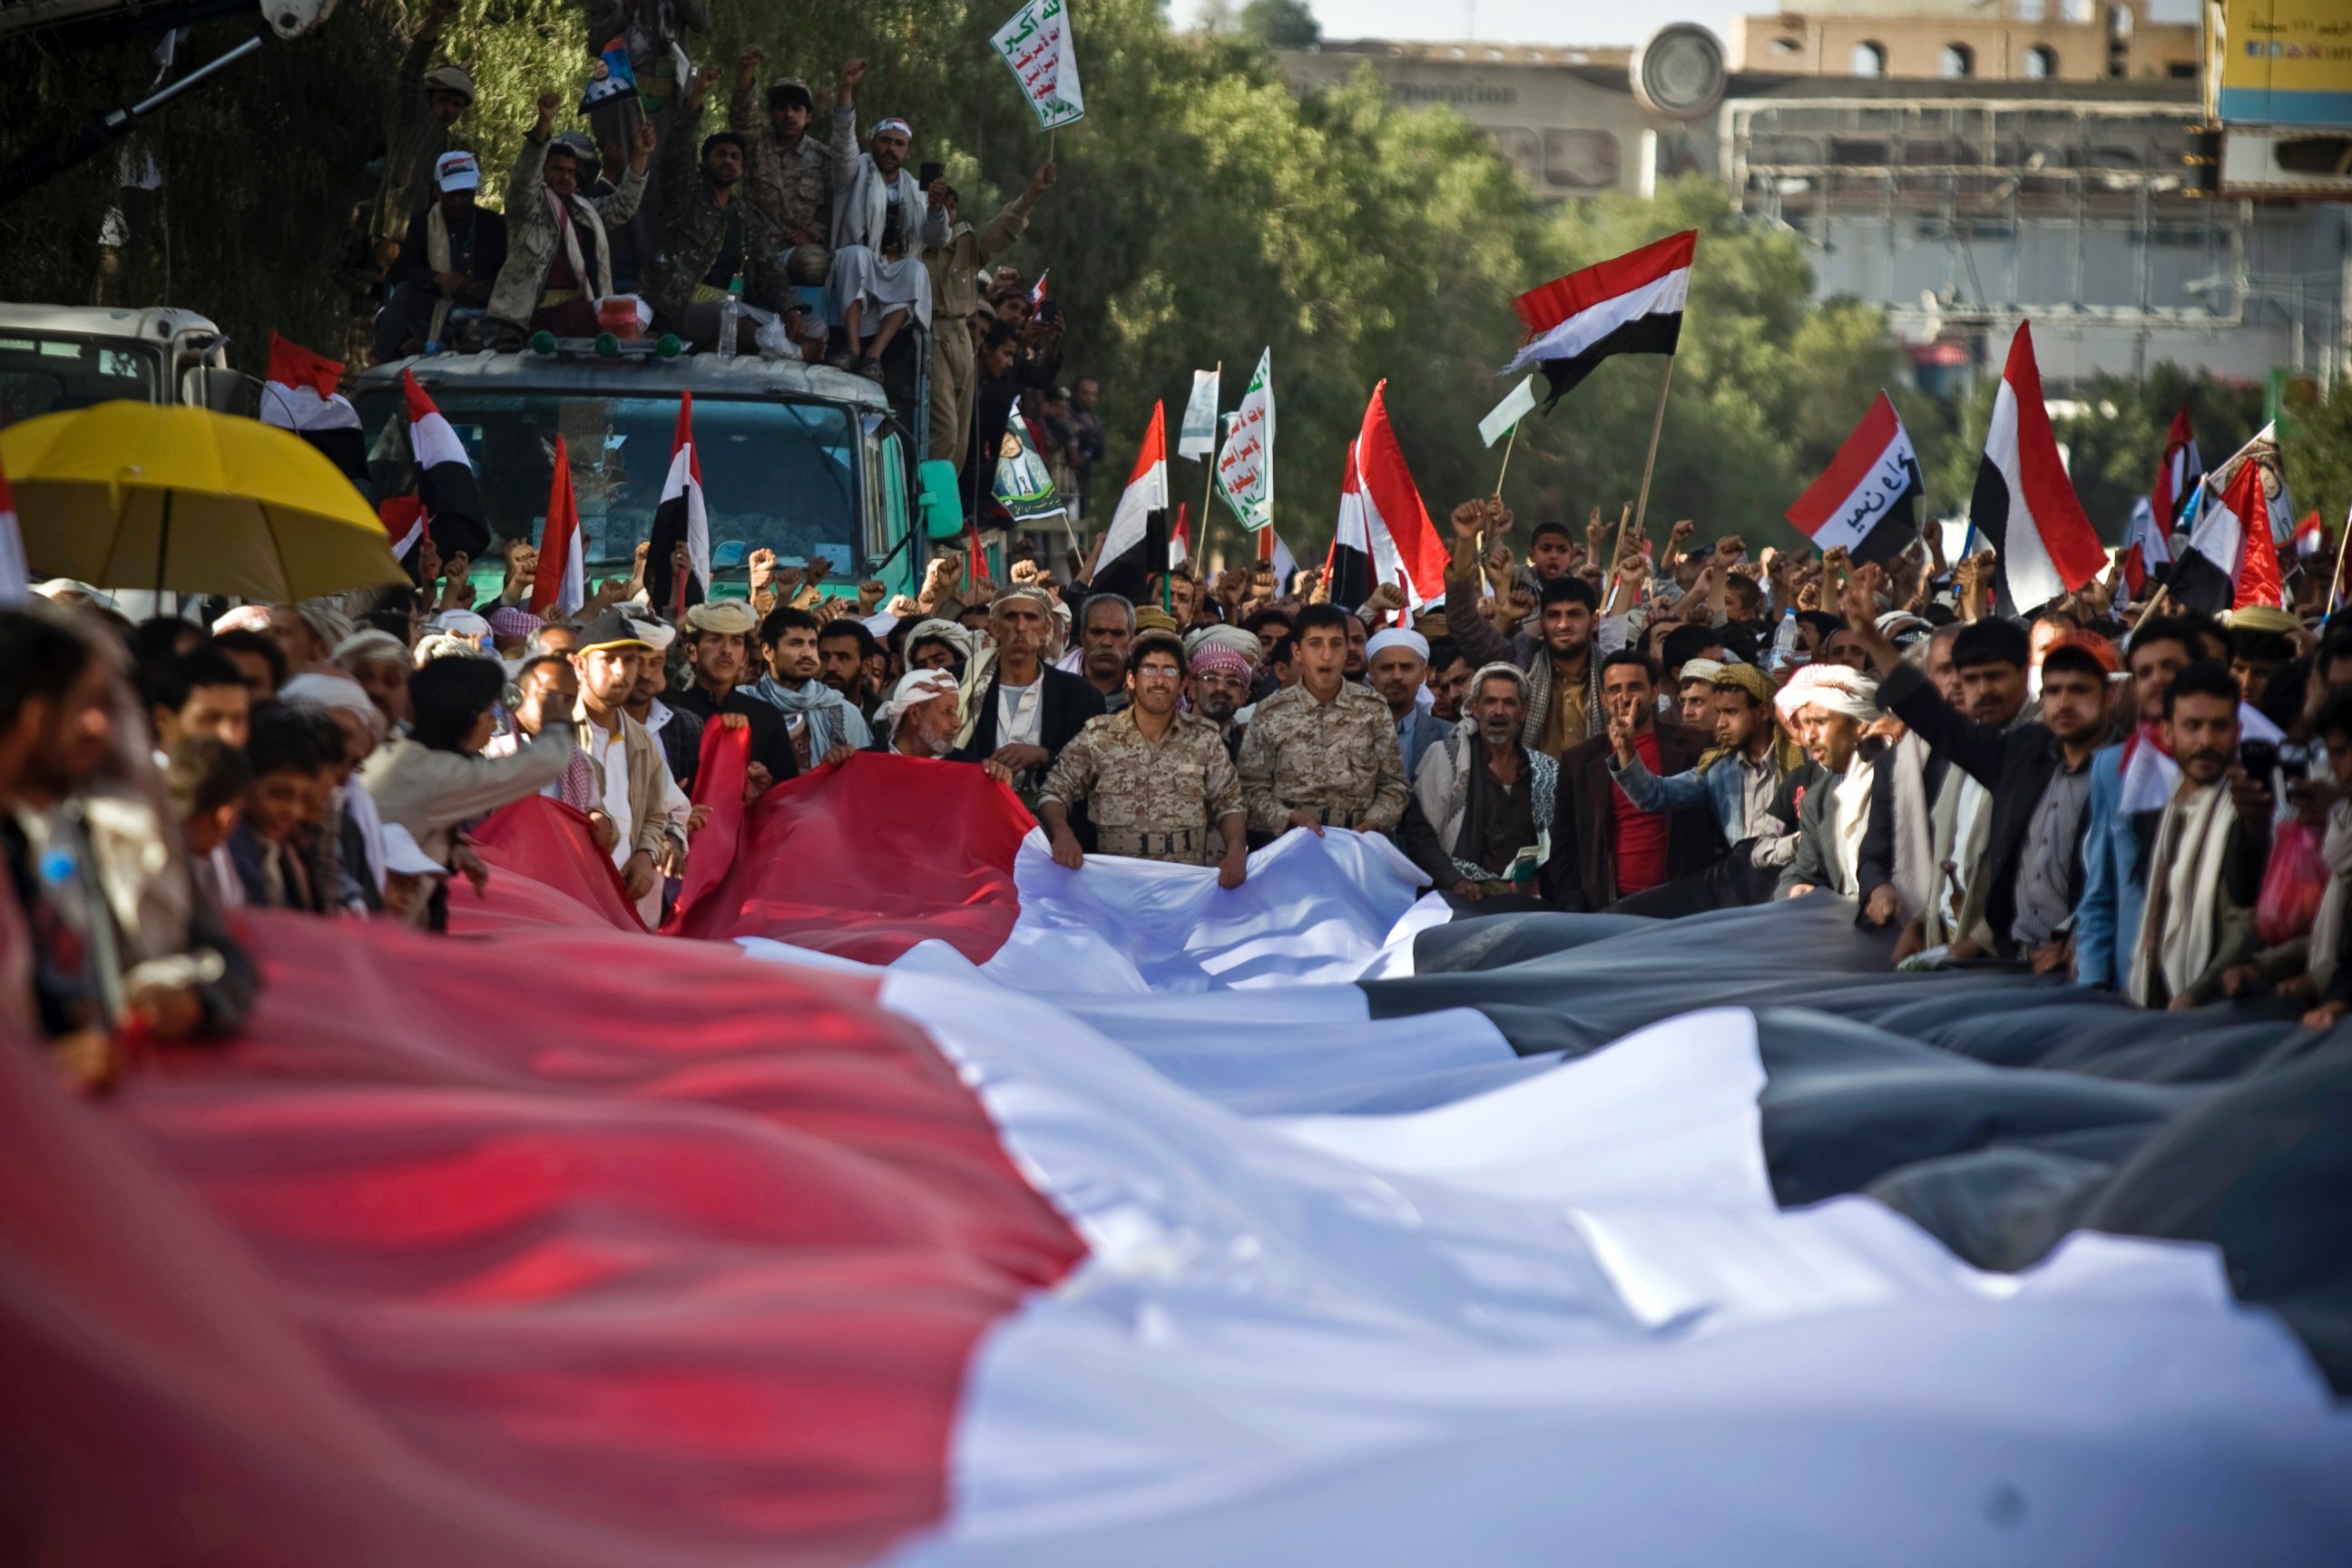 PHOTO: Houthi Shiite Yemenis hold carry a large representation of the national flag during a celebration marking the fourth anniversary of the revolution in Sanaa, Yemen, Feb. 11, 2015.